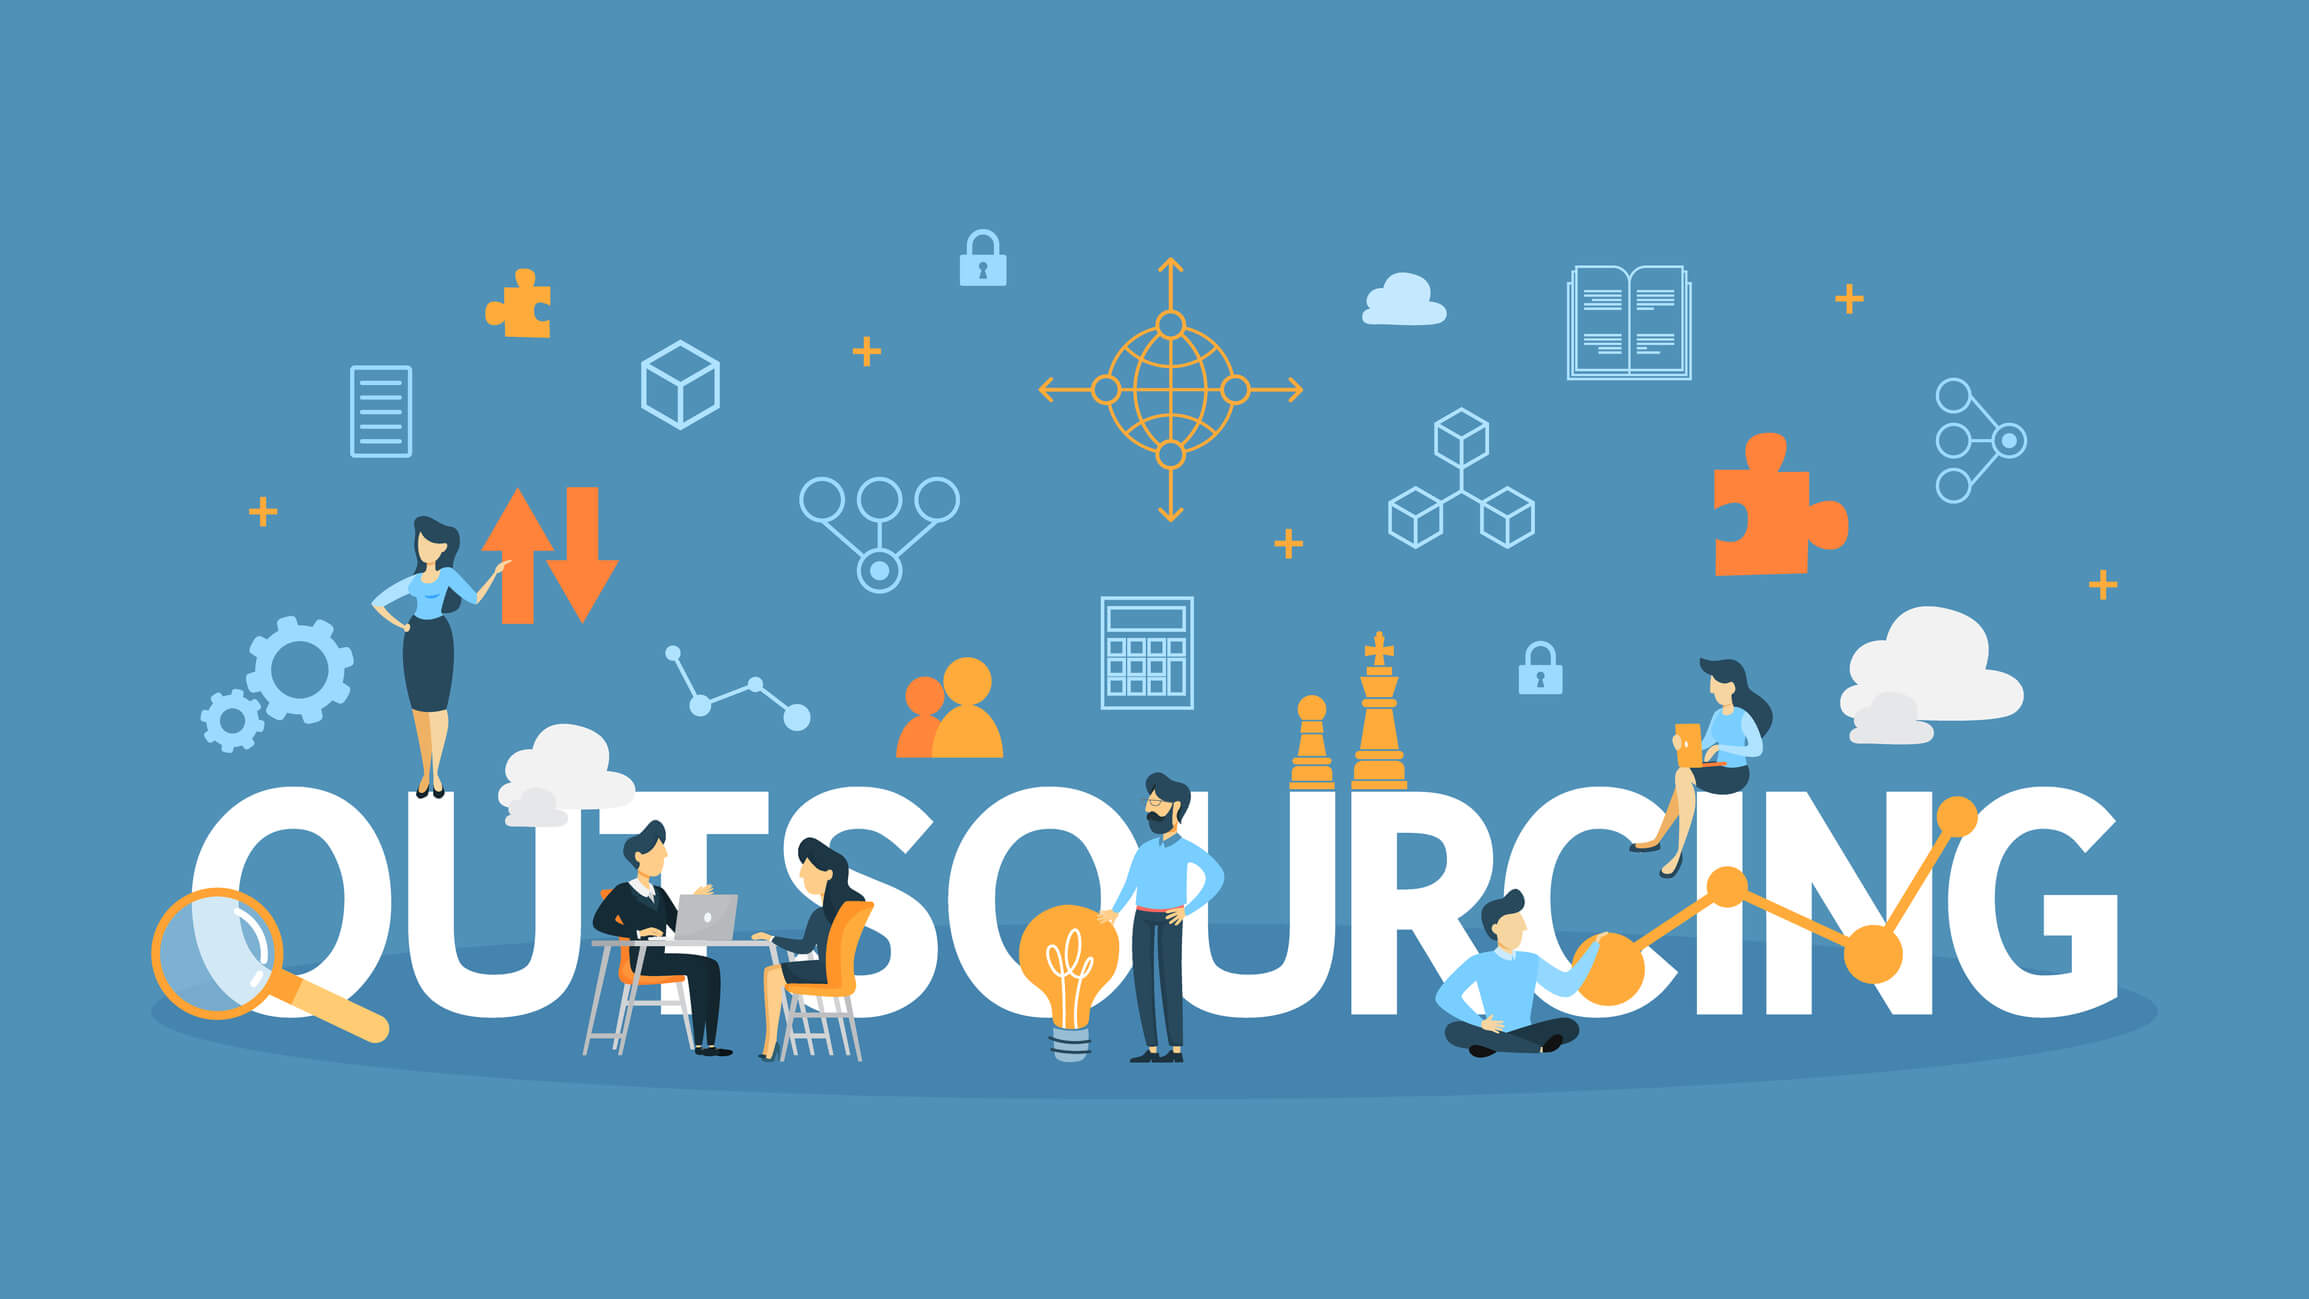 How To Outsource Software Development Projects The Right Way